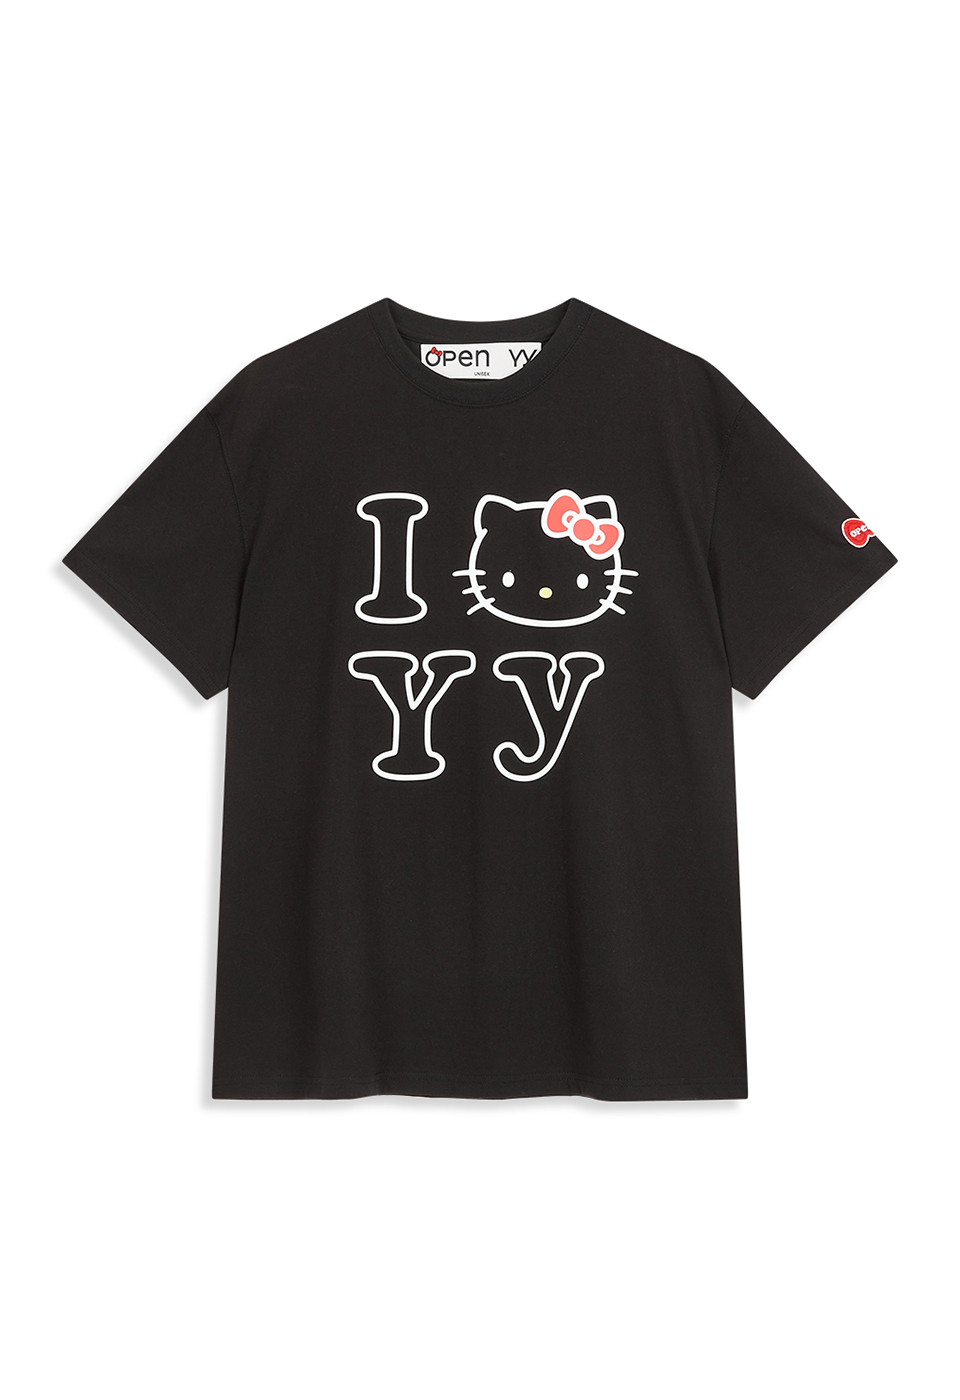 [6/11 DELIVERY] HELLO KITTY X YY T-SHIRT, BLACK